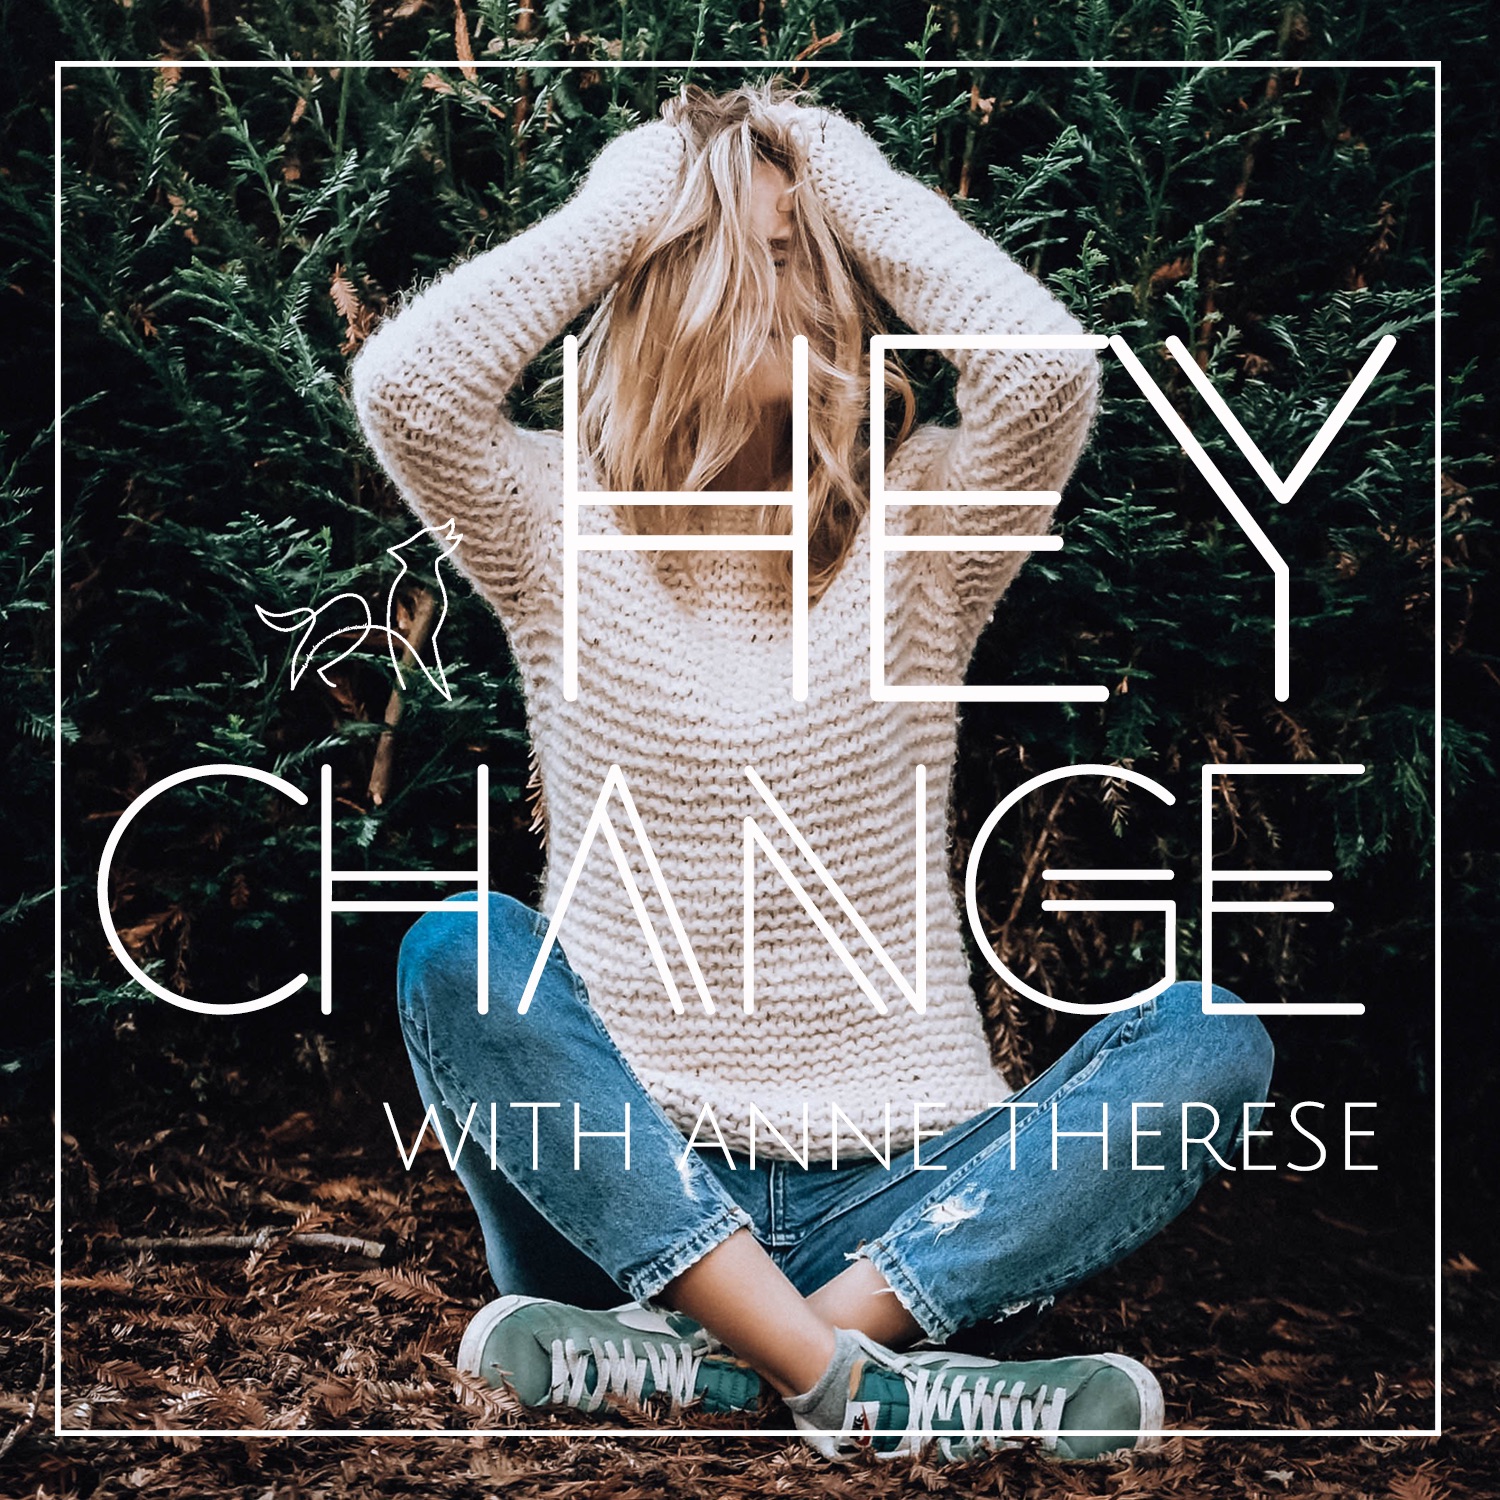 E037: From Chubby Kid to Vegan Model - Self-Empowerment, Food & Compassionate Living